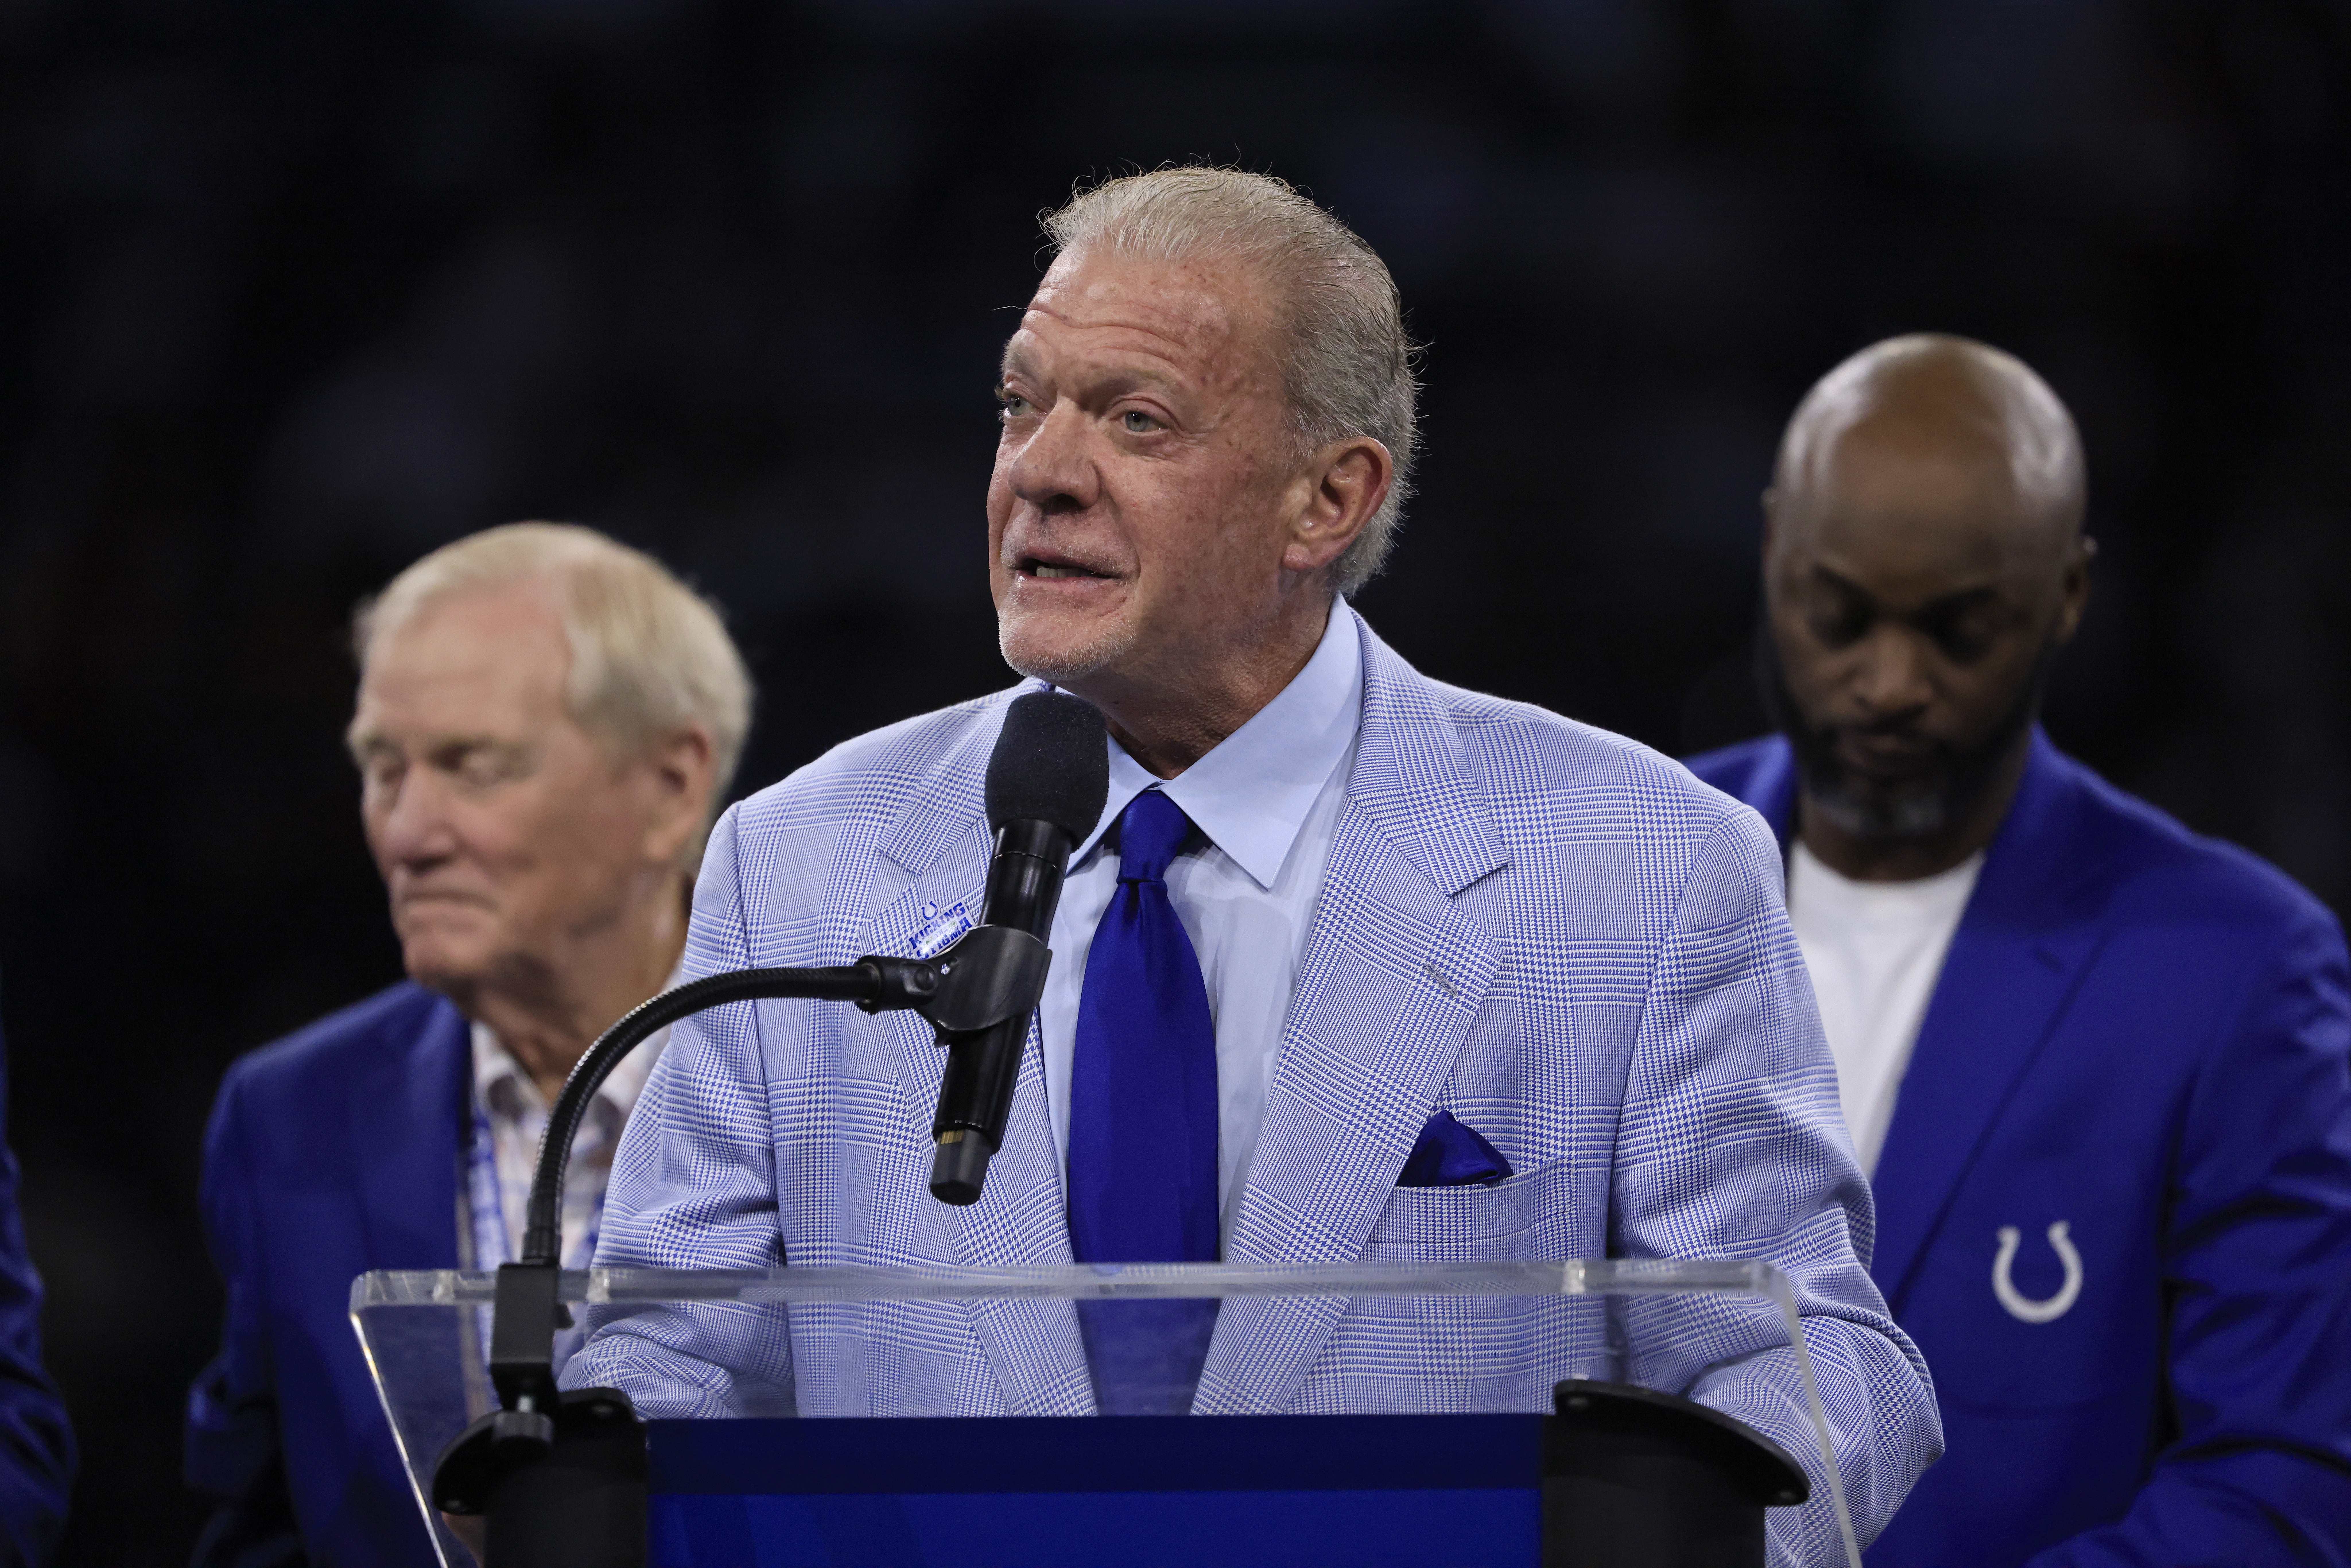 Jim Irsay (C), owner of the Indianapolis Colts, speaks at the Indianapolis Colts Ring of Honor ceremony for Tarik Glenn during halftime of the game against the Washington Commanders at Lucas Oil Stadium in Indianapolis, Indiana, October 30, 2022. /CFP 